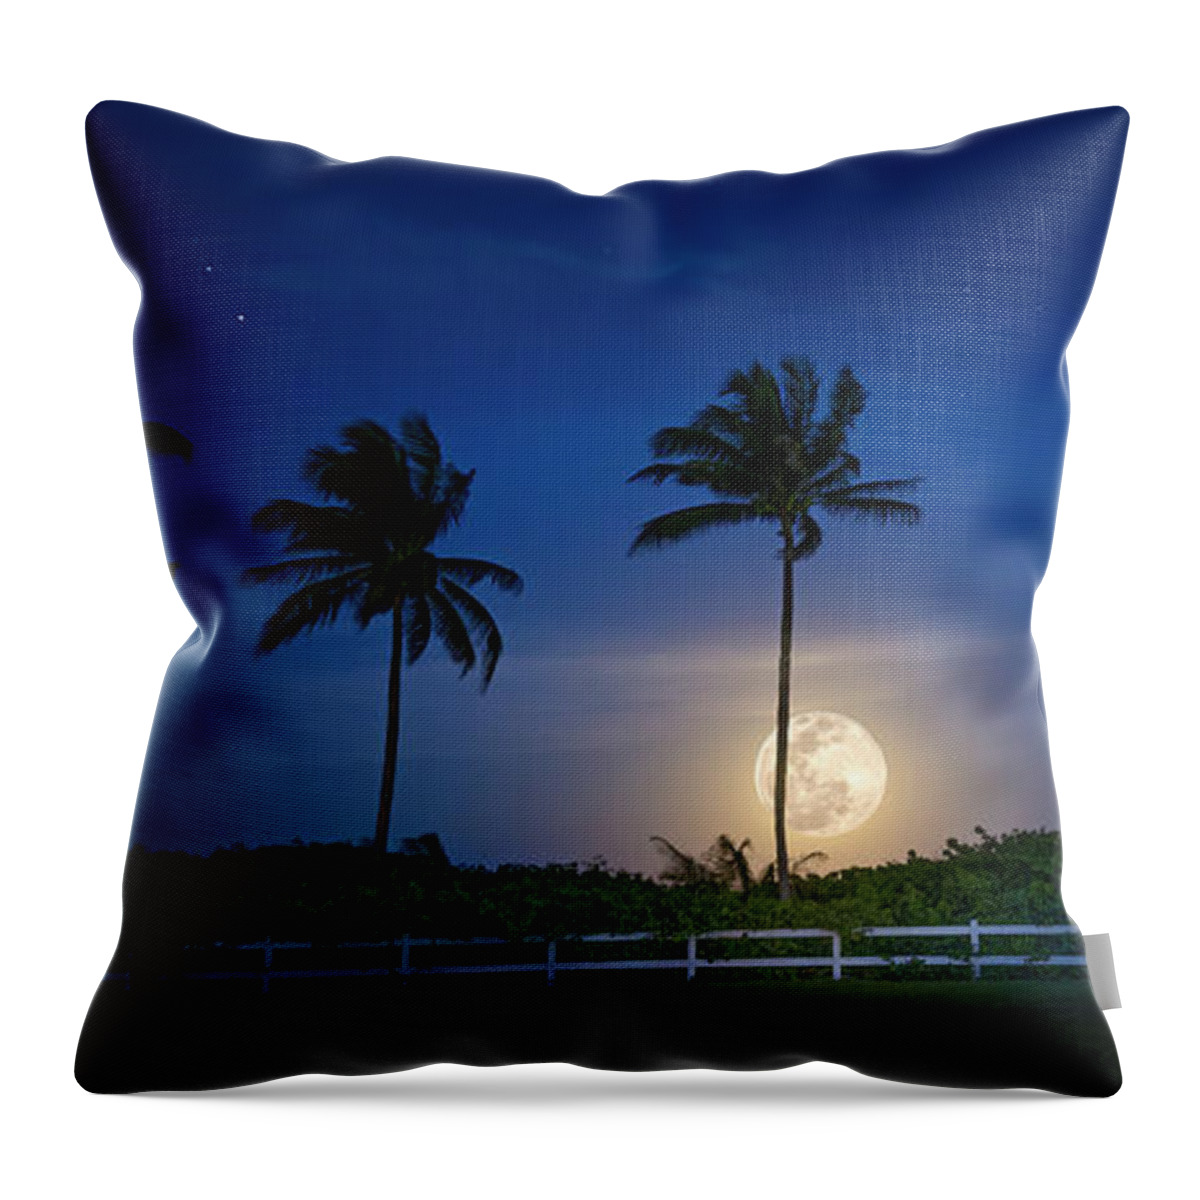 Moon Throw Pillow featuring the photograph Mystic Moonlight by Mark Andrew Thomas